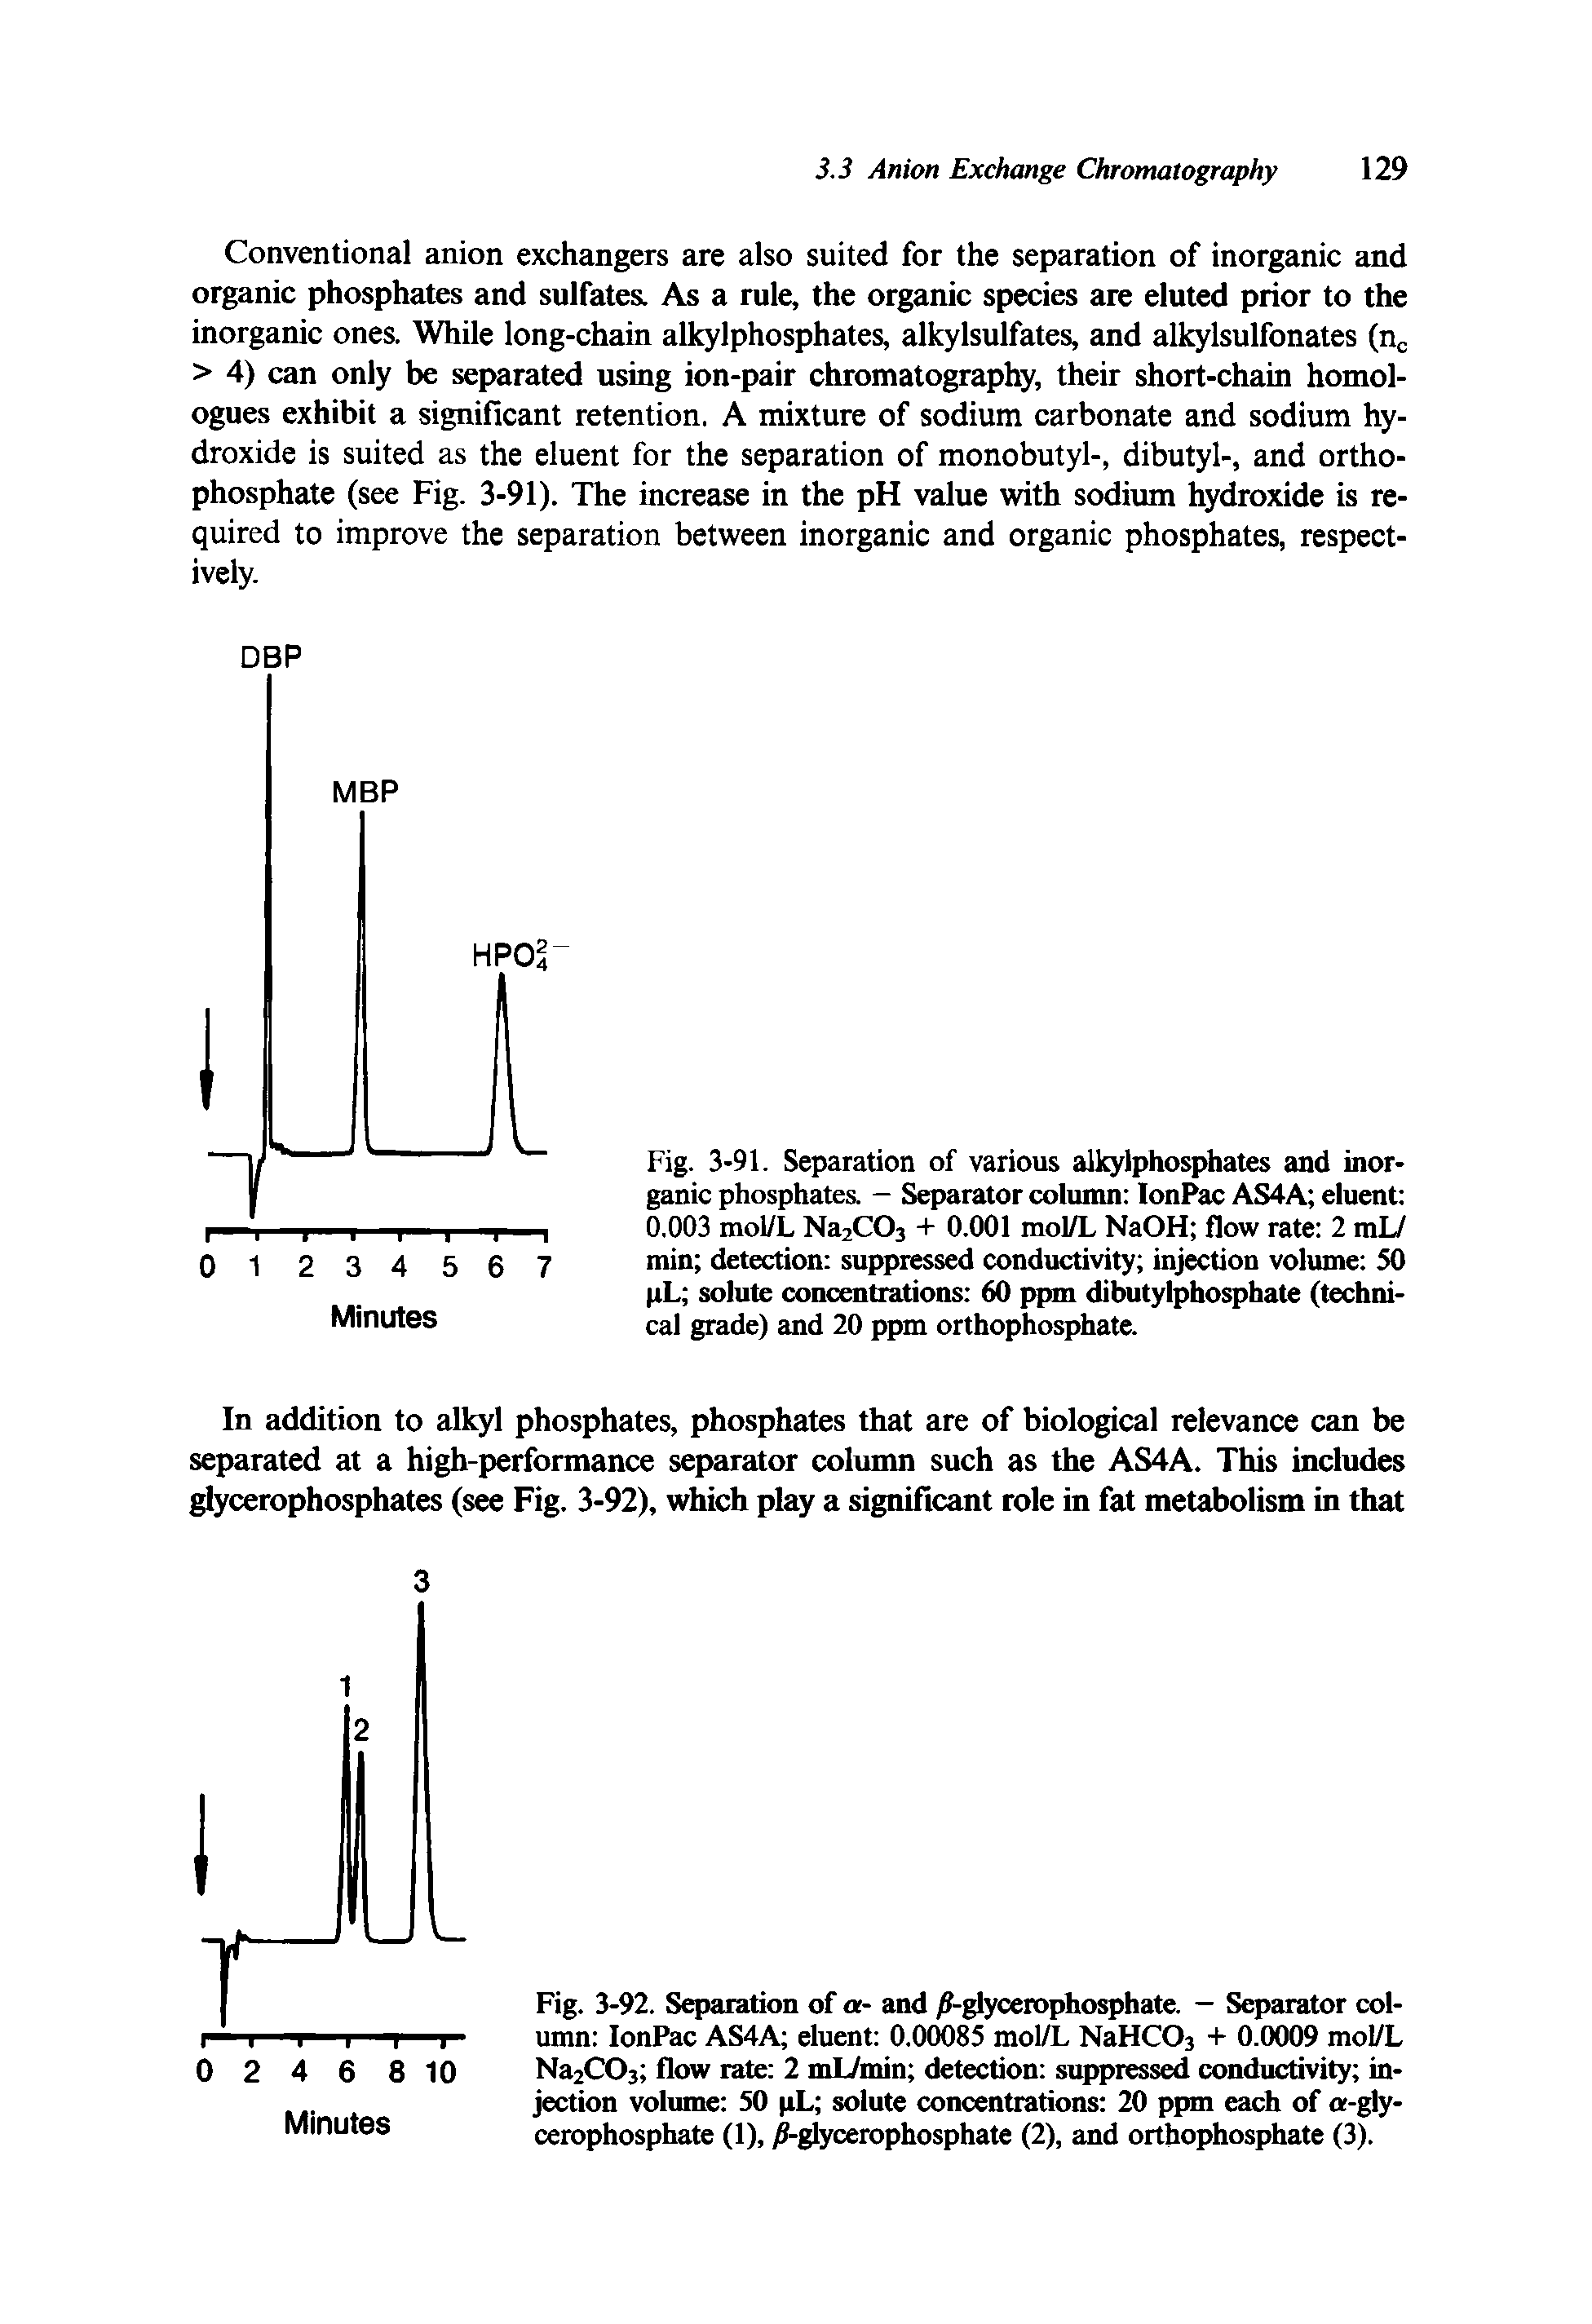 Fig. 3-91. Separation of various alkylphosphates and inorganic phosphates. - Separator column IonPac AS4A eluent 0.003 mol/L Na2C03 + 0.001 mol/L NaOH flow rate 2 mL/ min detection suppressed conductivity injection volume SO pL solute concentrations 60 ppm dibutylphosphate (technical grade) and 20 ppm orthophosphate.